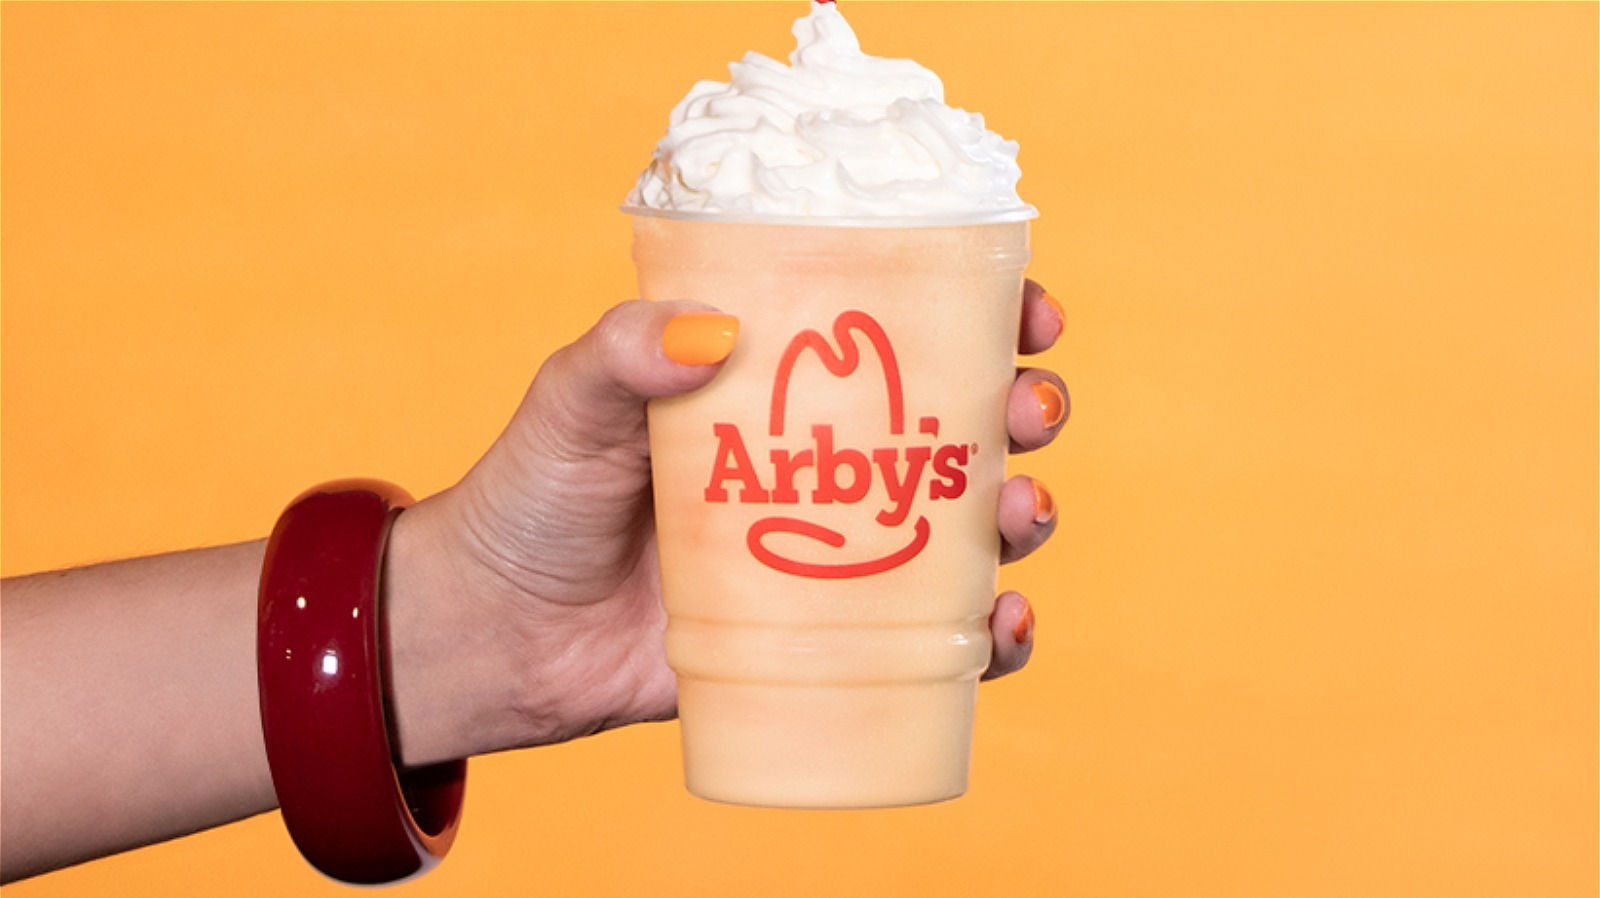 Arby's Returning LimitedTime Shake Flavor Has Twitter Excited